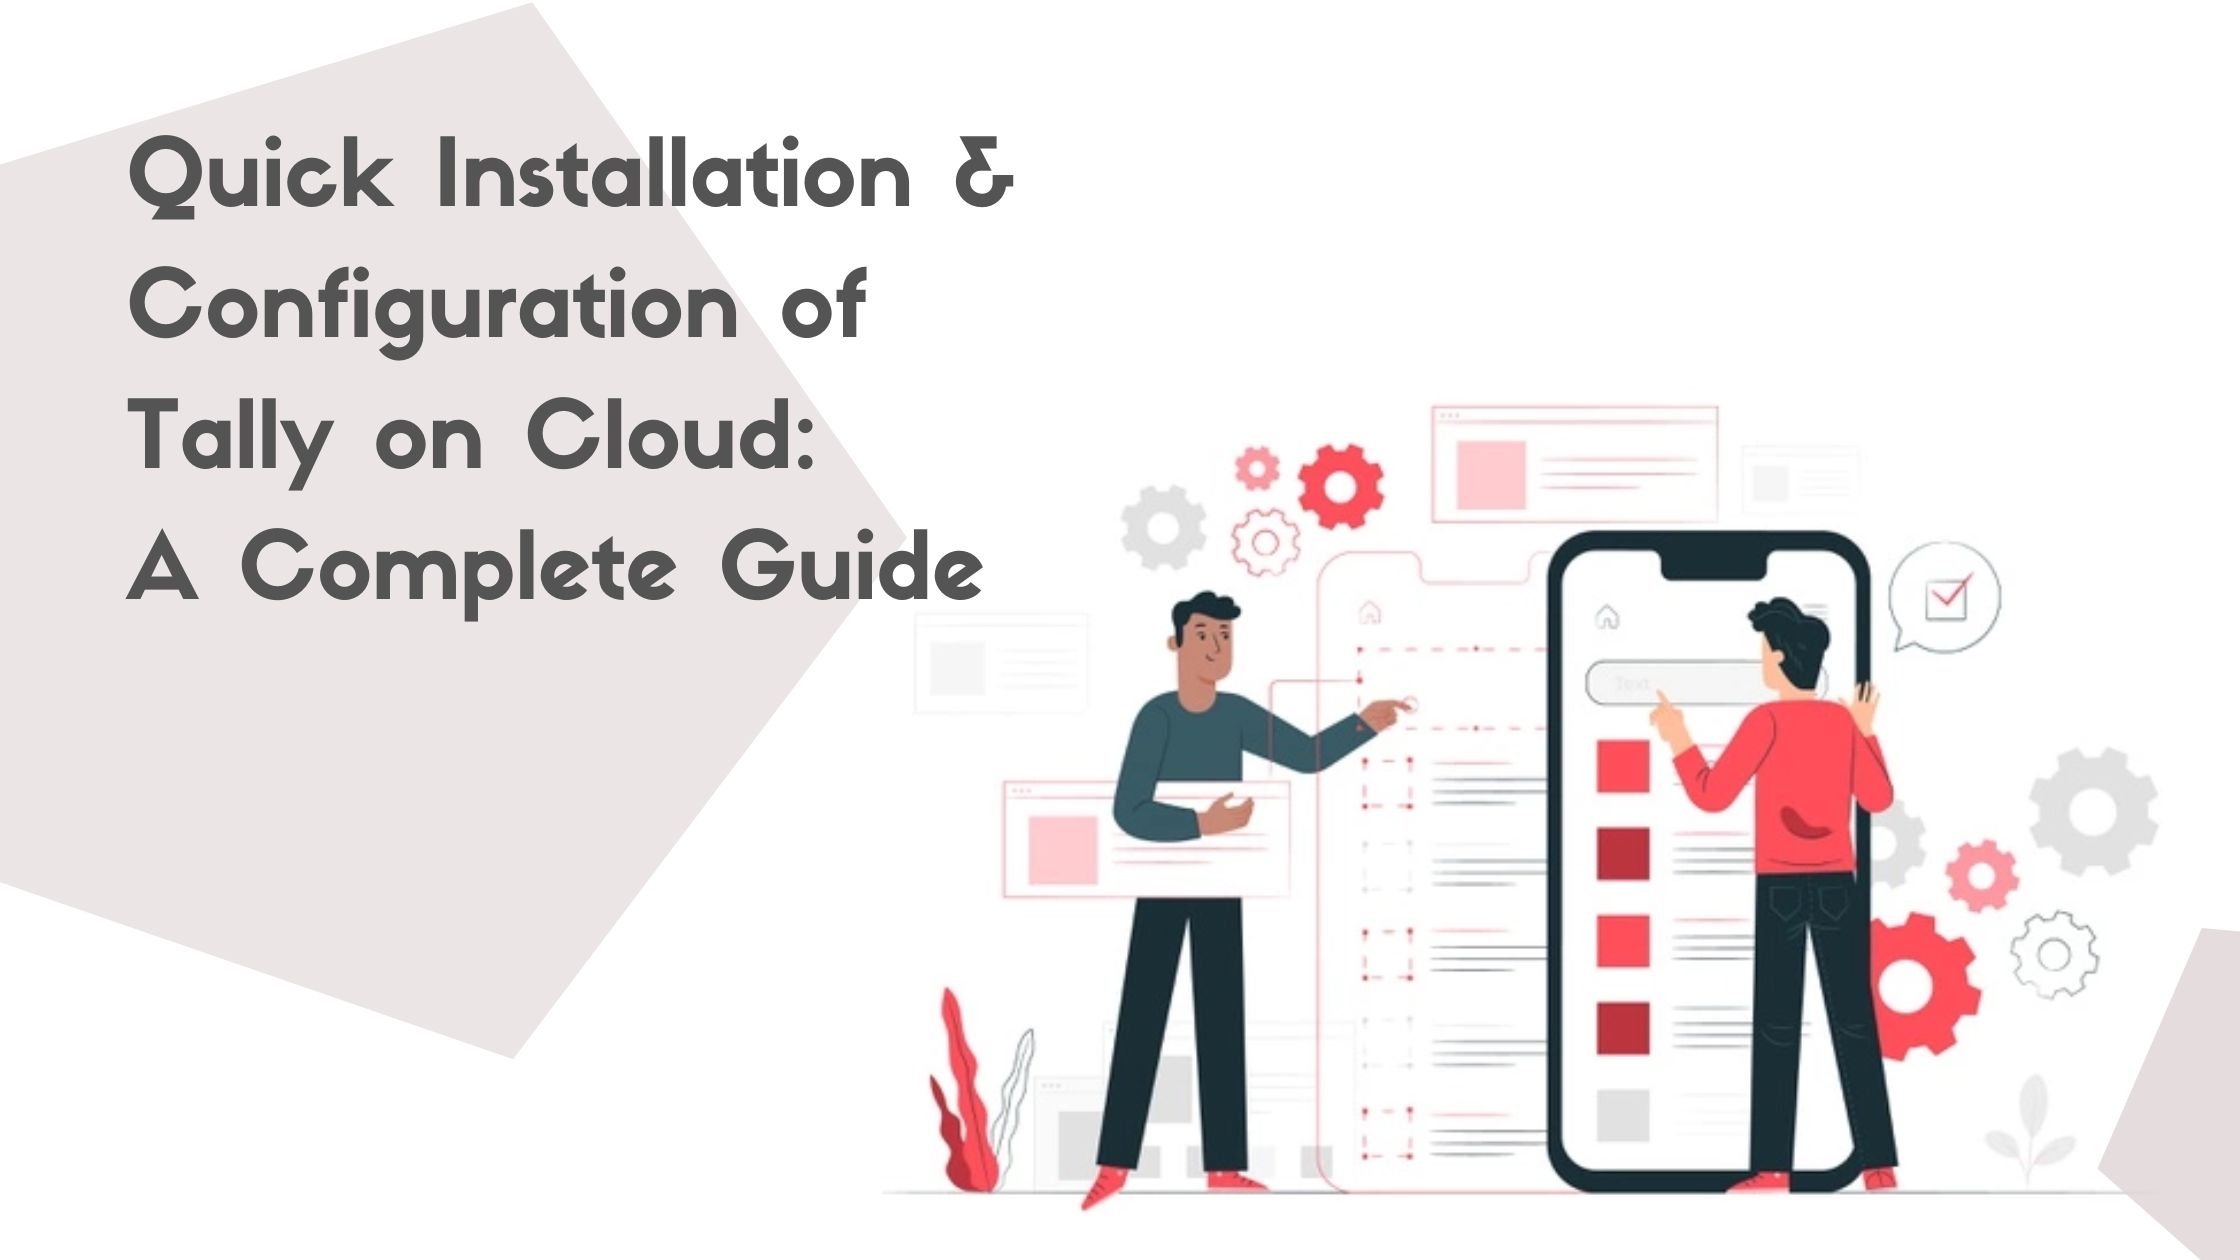 Tally on Cloud installation & configuration